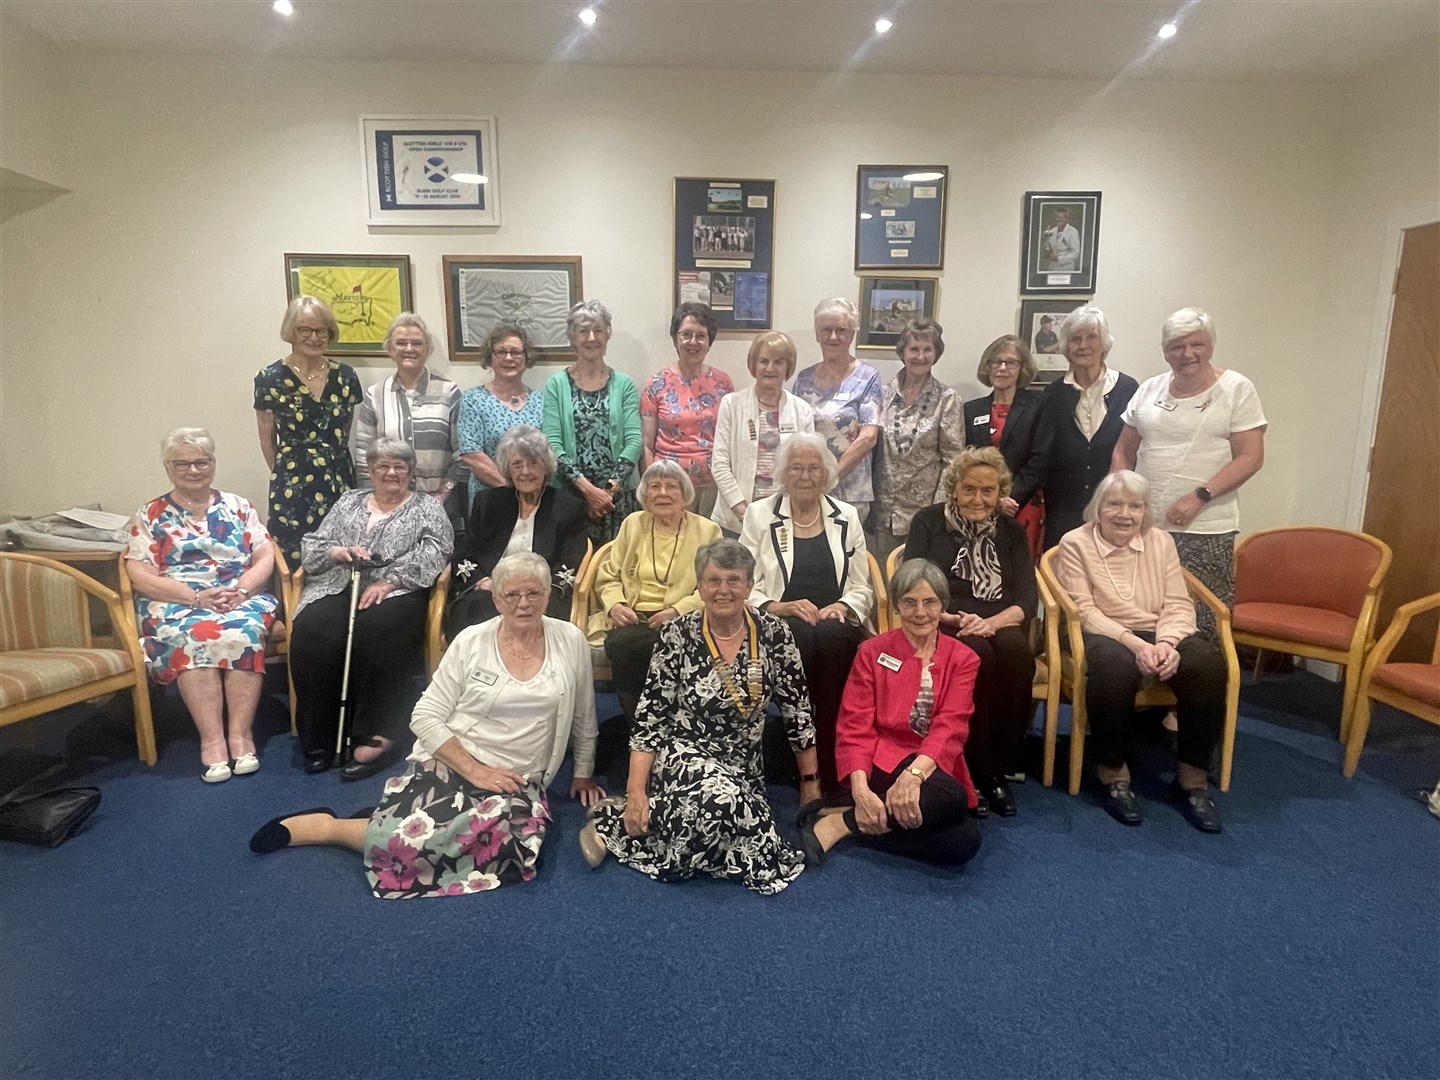 The final meeting of the Inner Wheel Club in Elgin was enjoyed by all.